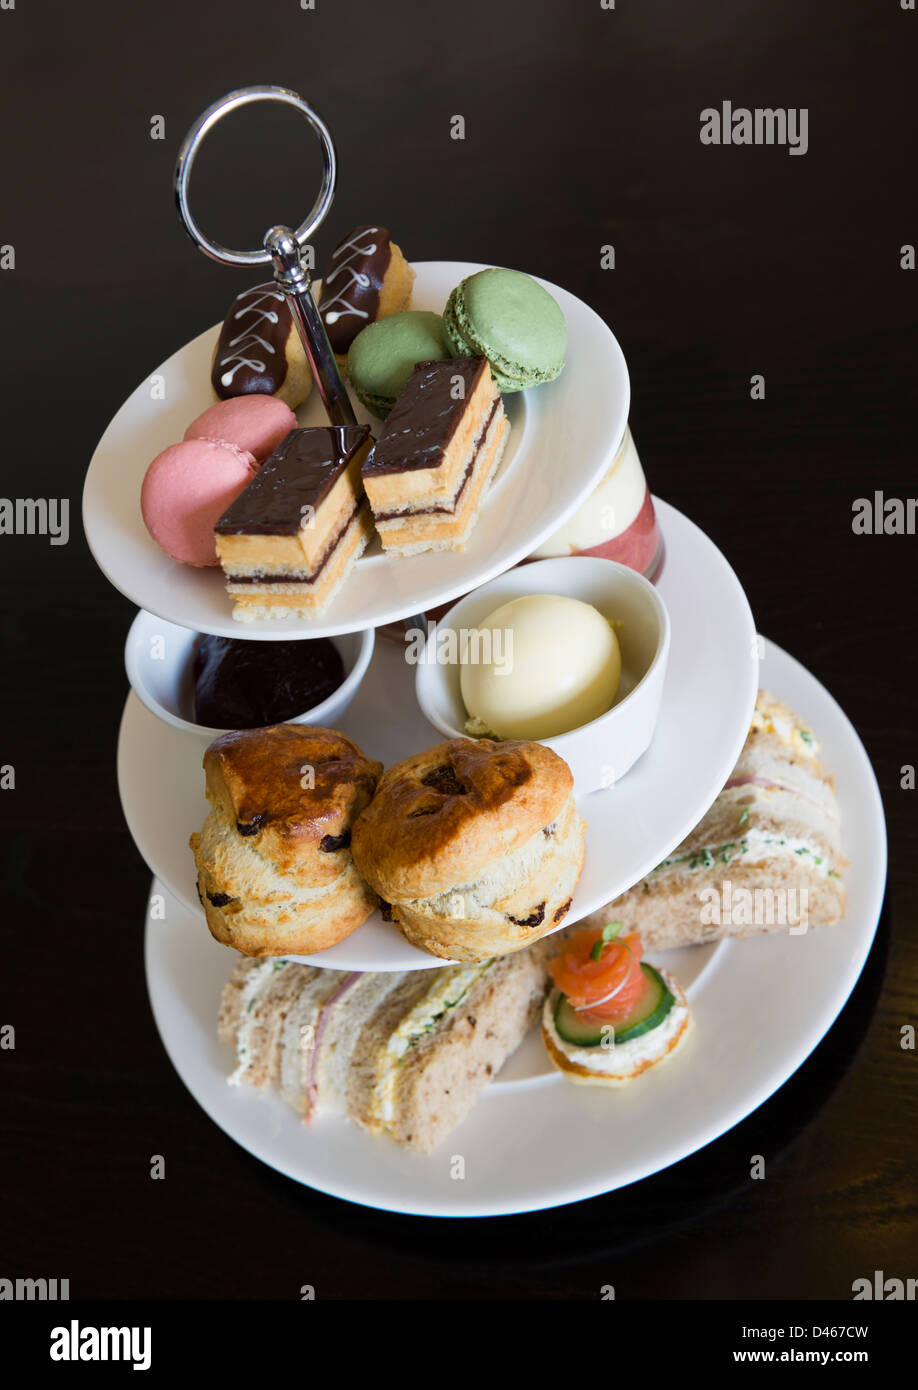 Afternoon tea with sandwiches and cakes Stock Photo